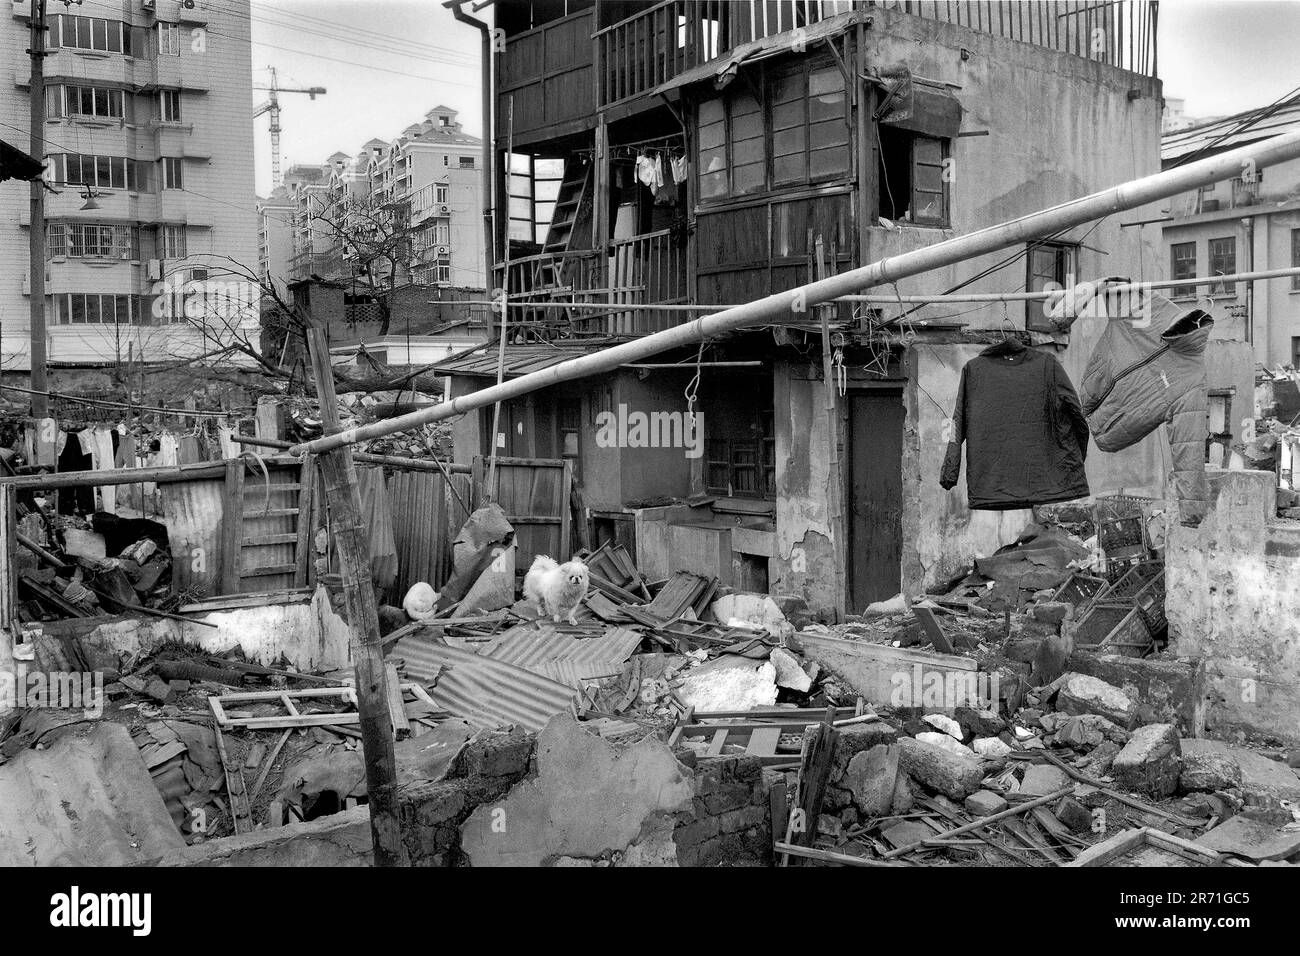 Shanghai China 2000. Laundry still hangs out to dry as traditional housing is torn down in Ruijin Nan Lu to make way for modern buildings. 2000s HOMER SYKES Stock Photo